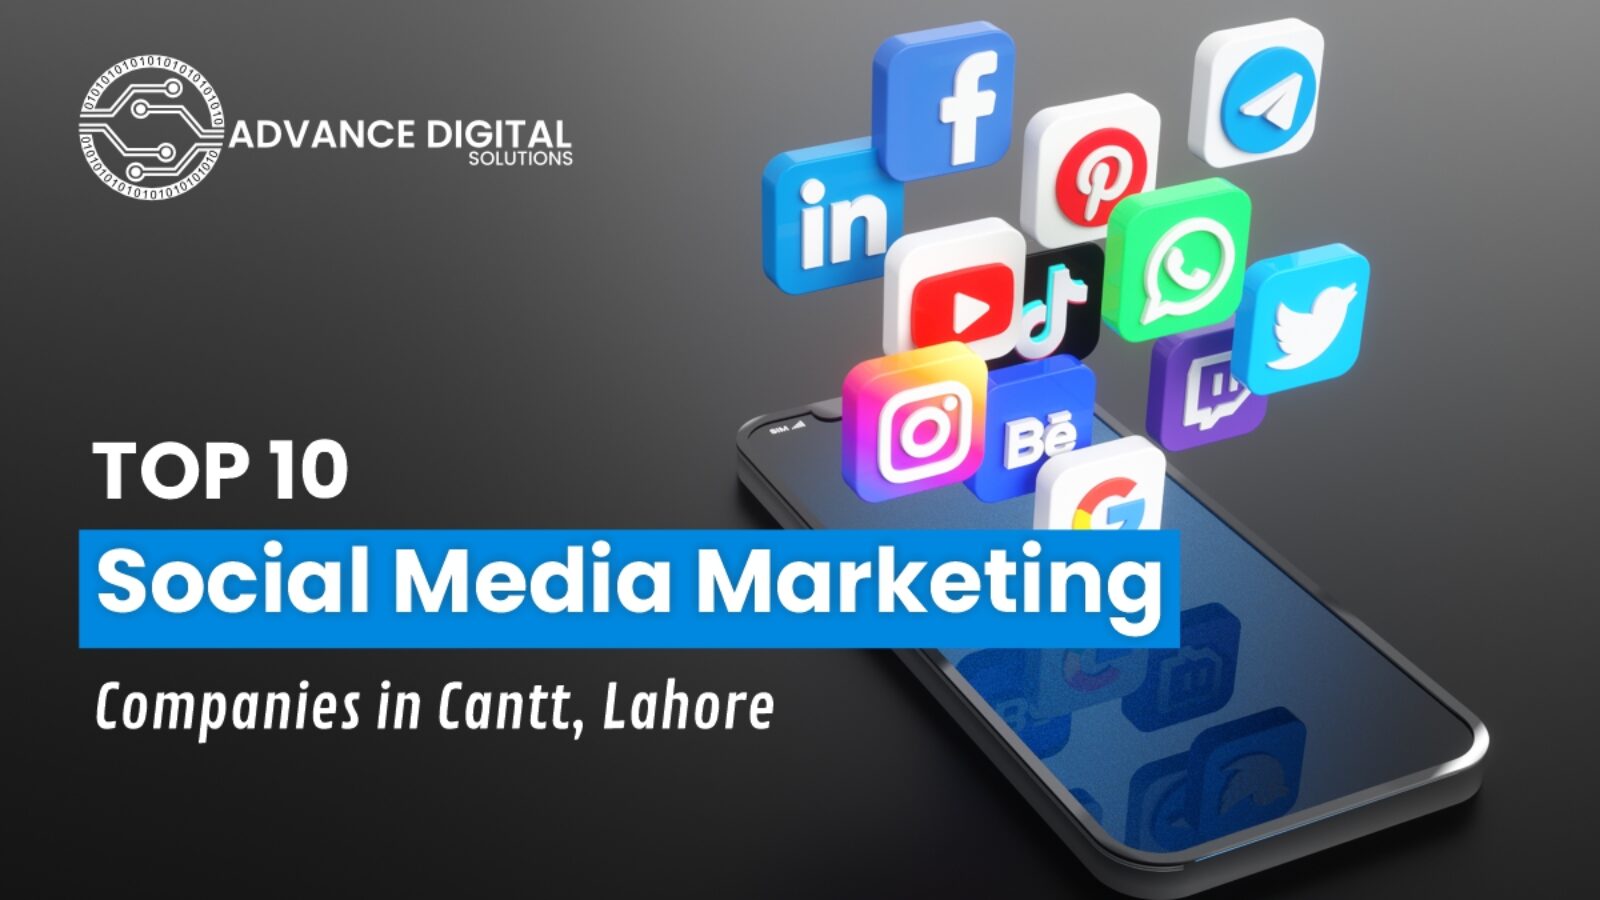 Top 10 Social Media Marketing Companies in Cantt, Lahore